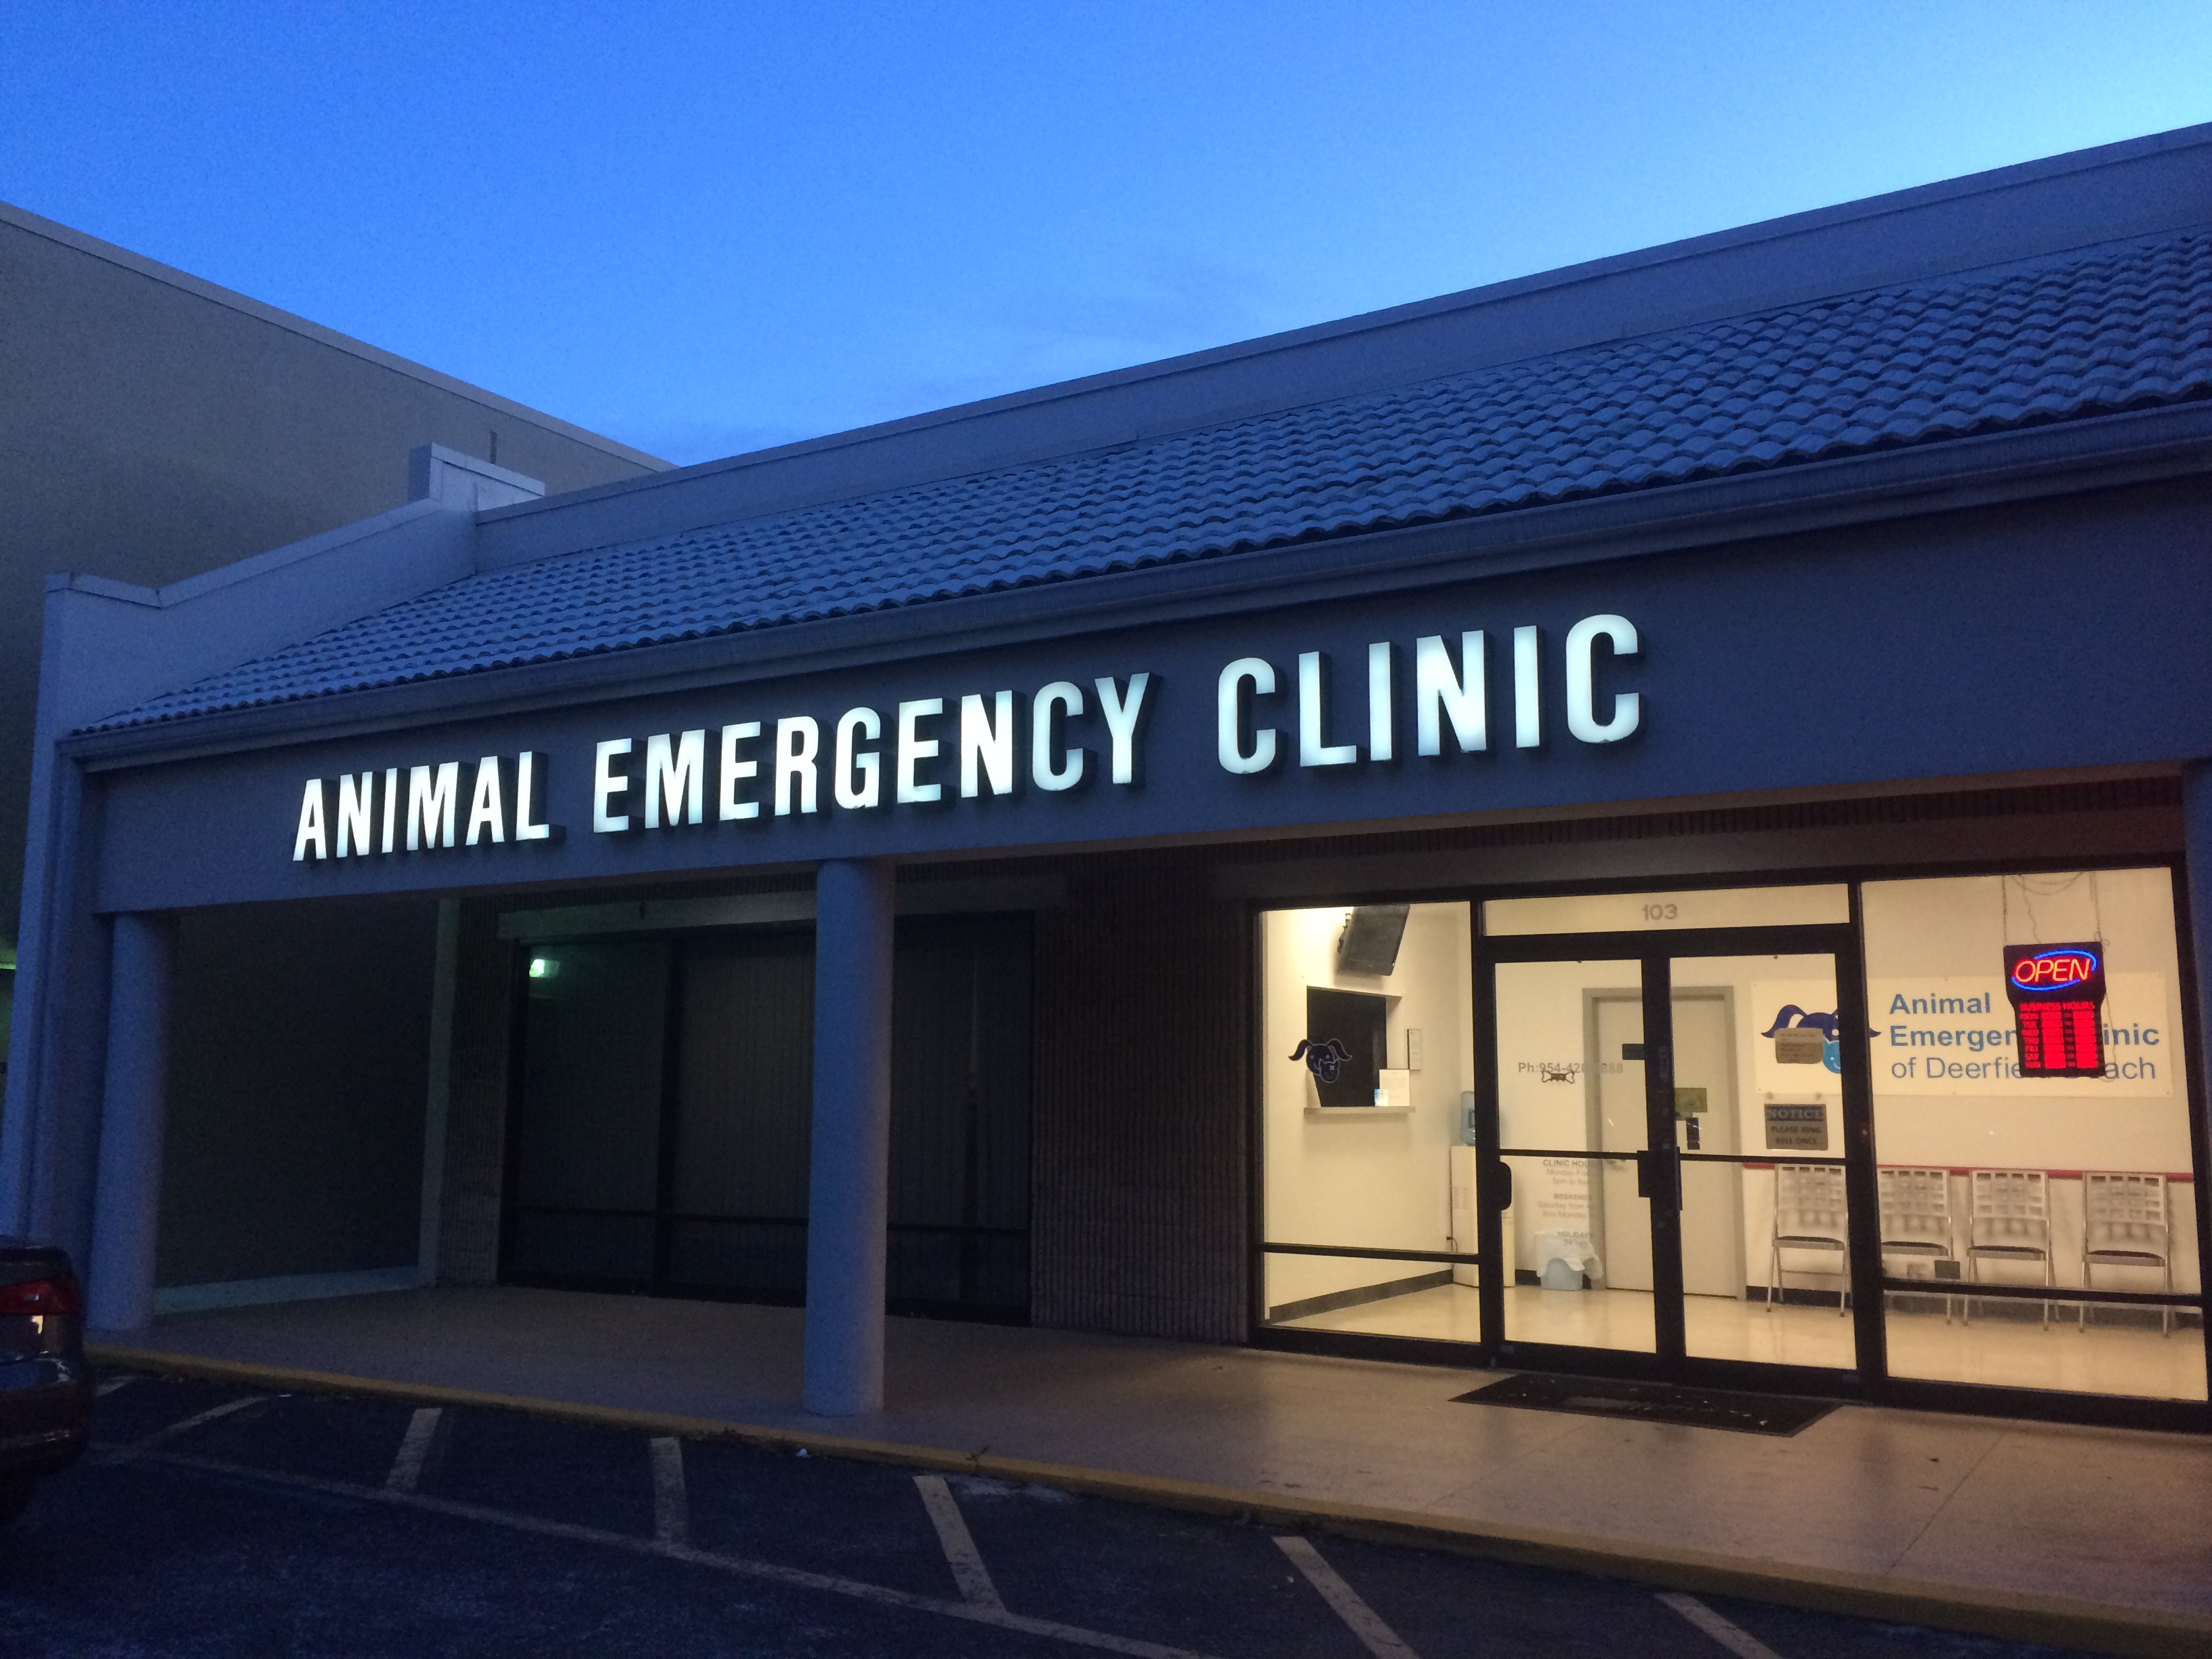 Animal Emergency Clinic is located at